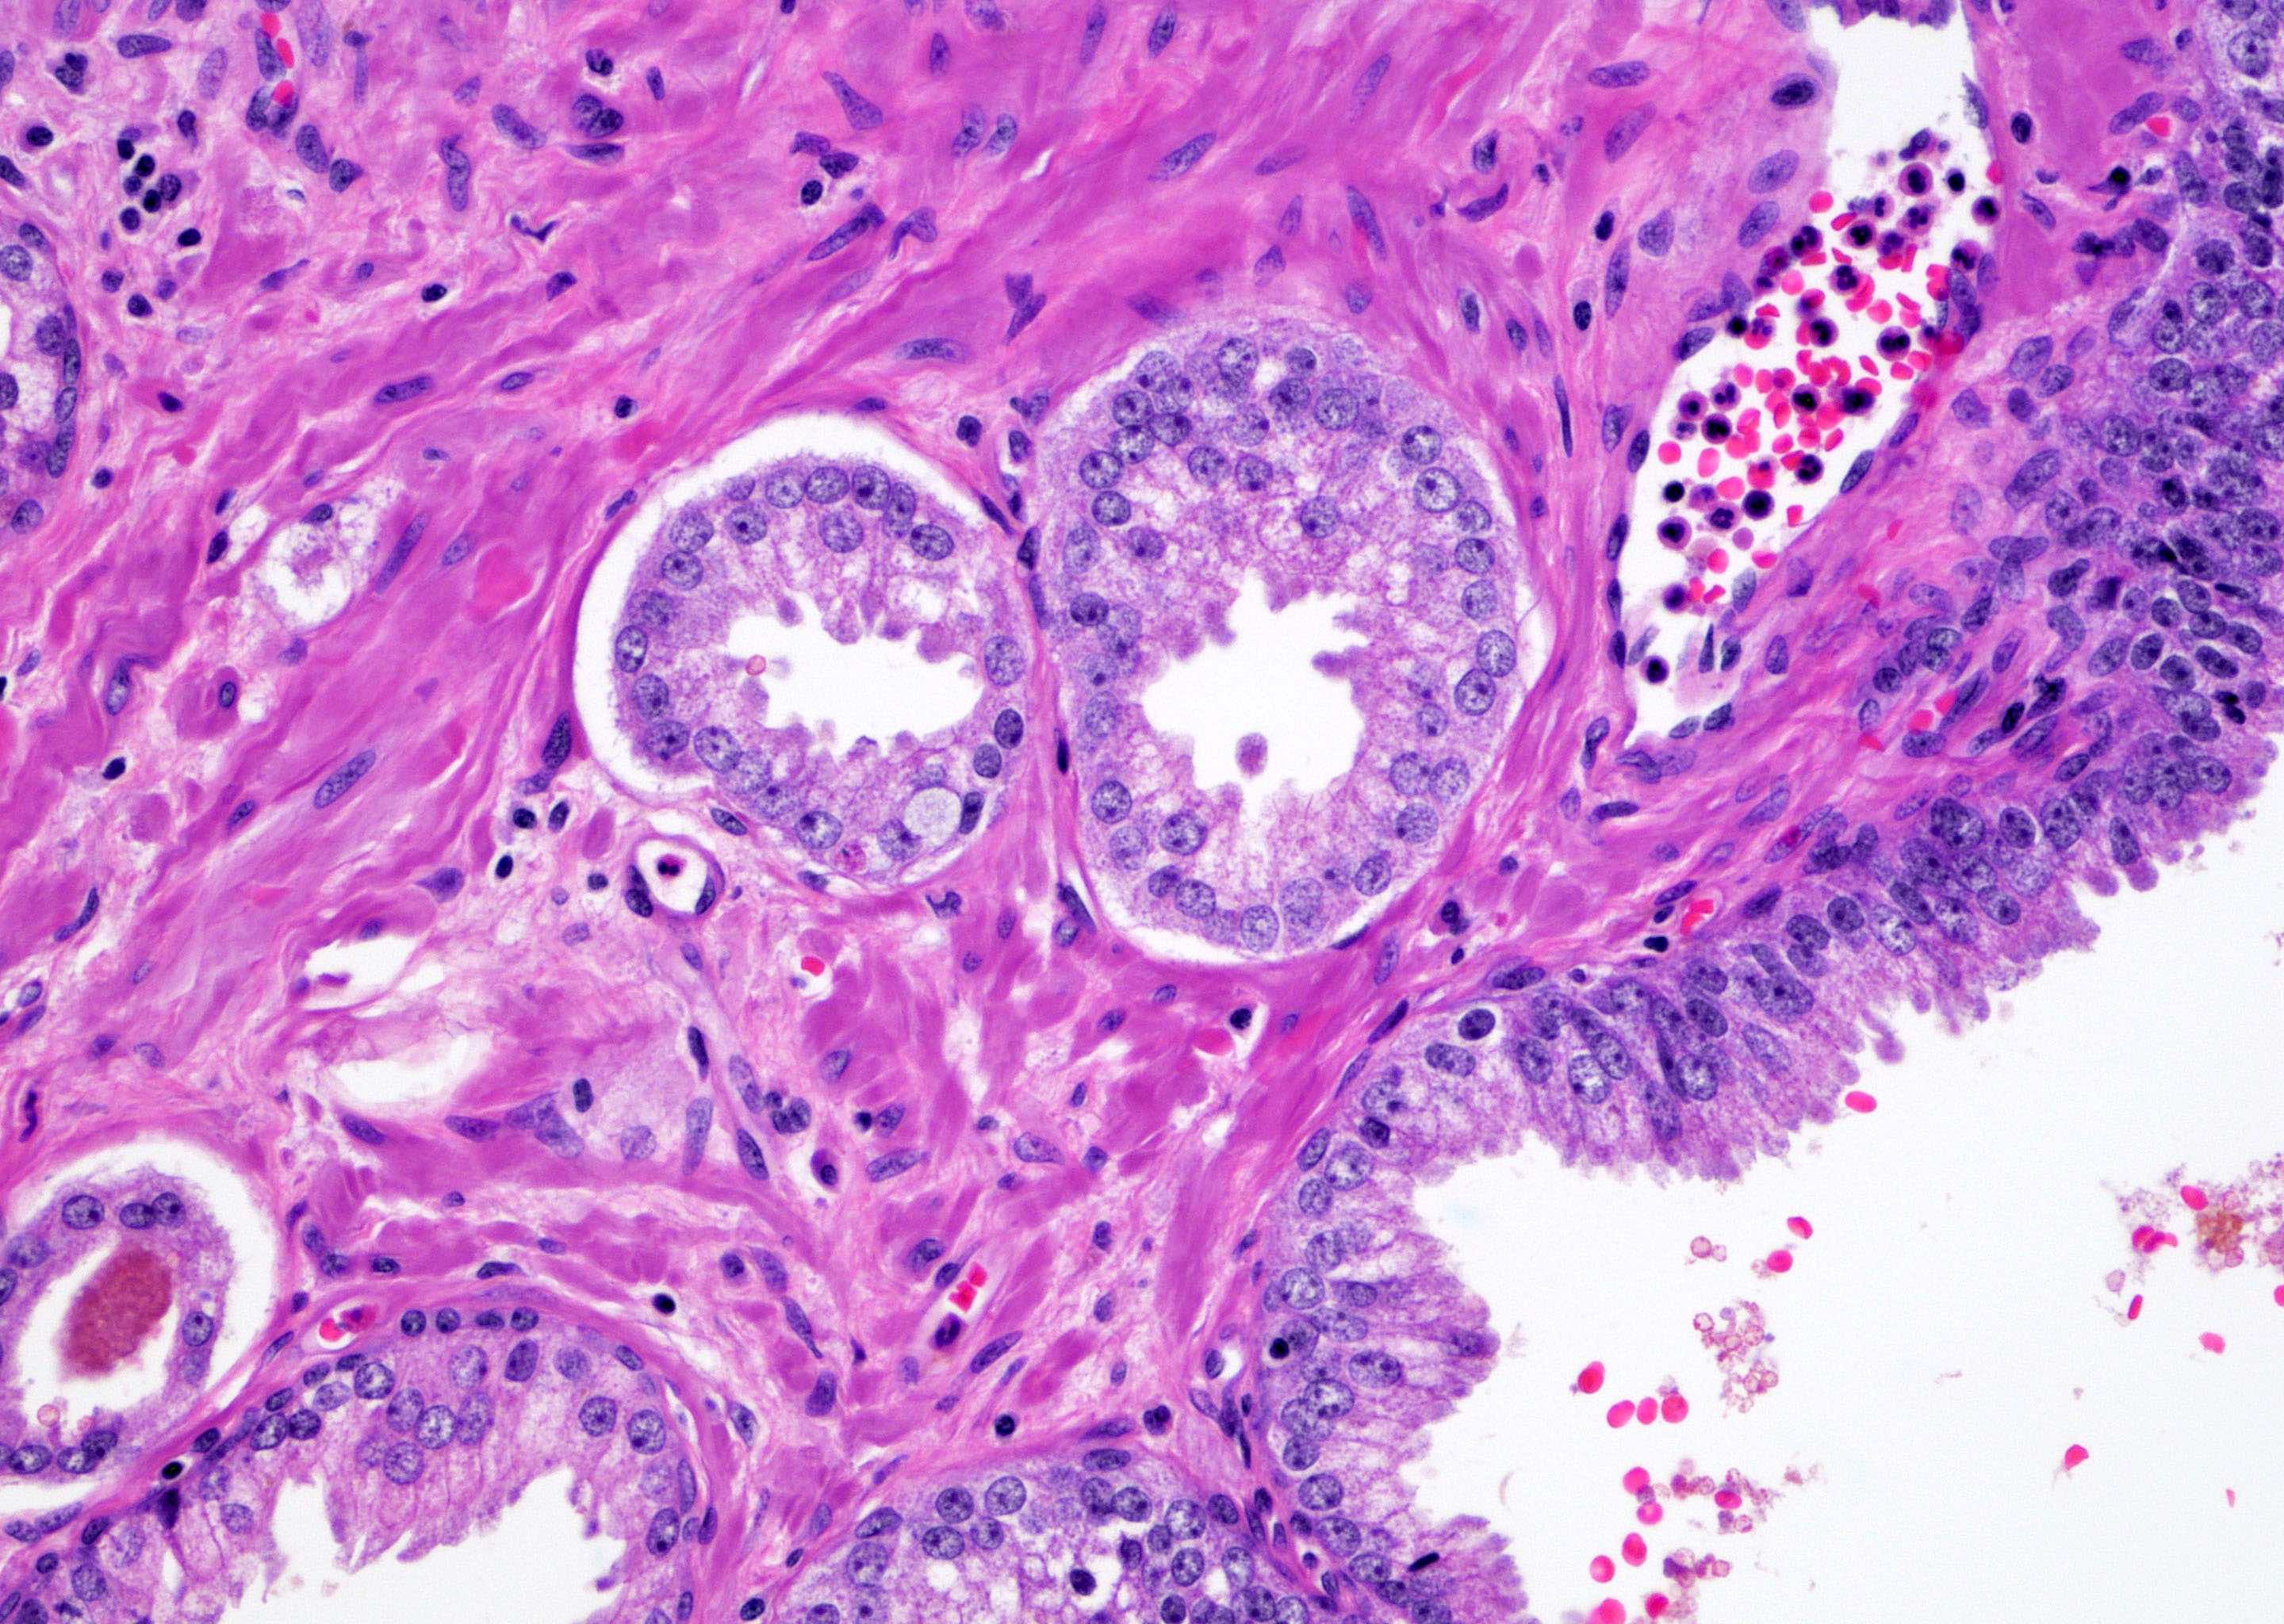 Atypical gland with basal cells